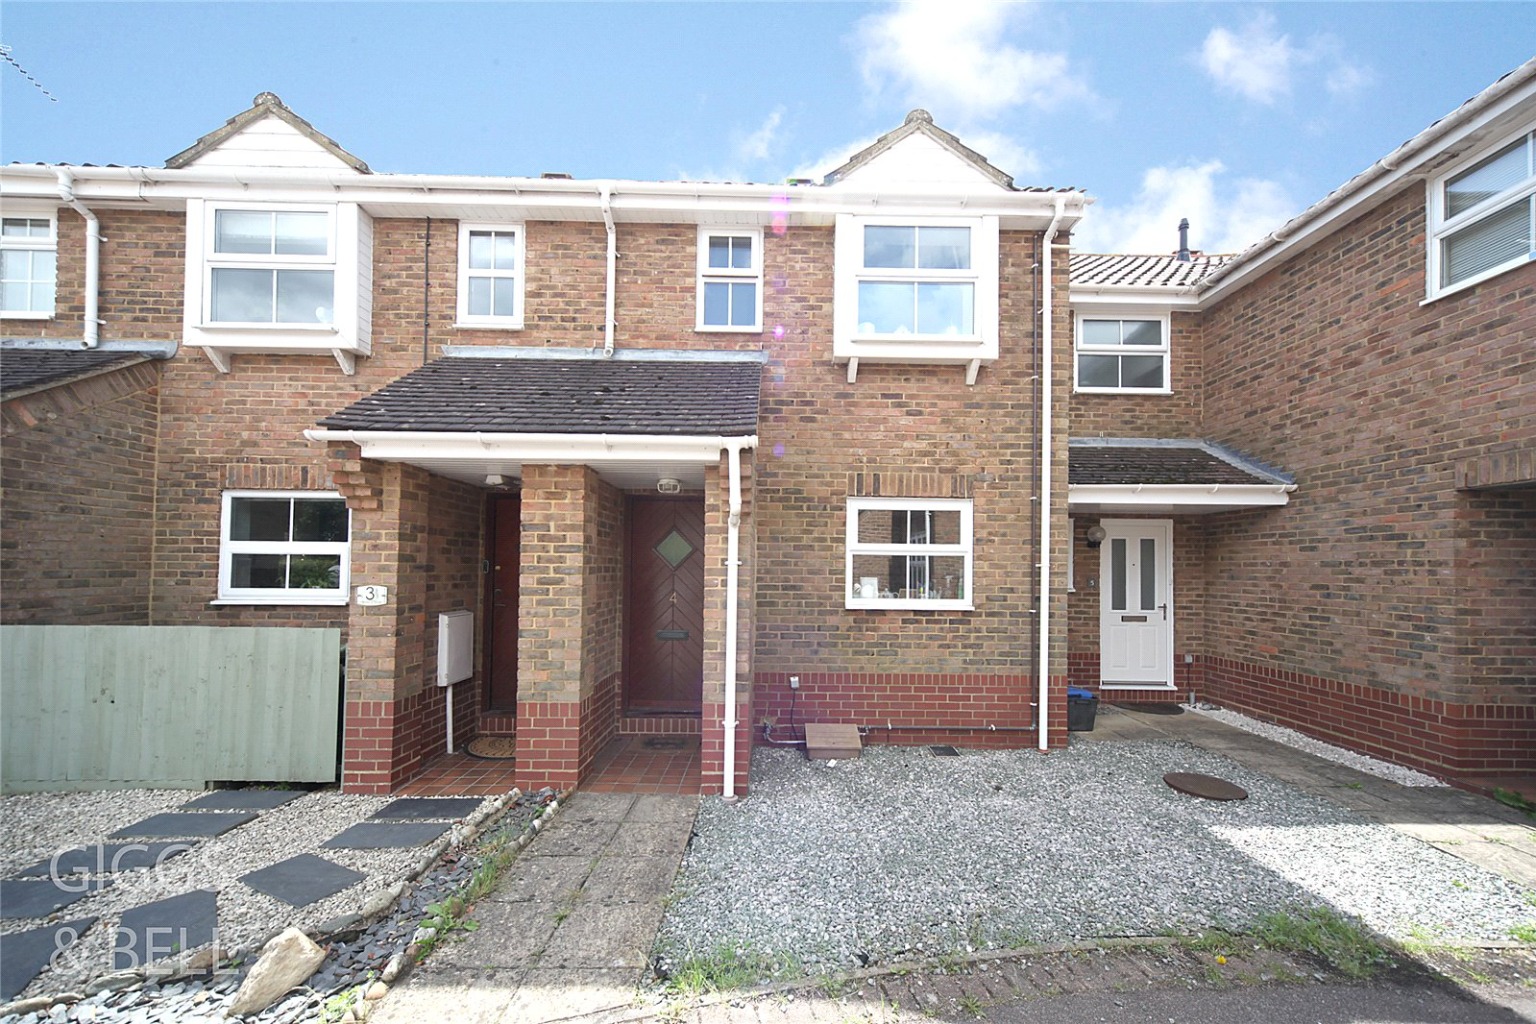 2 bed terraced house for sale in Edkins Close, Luton 0